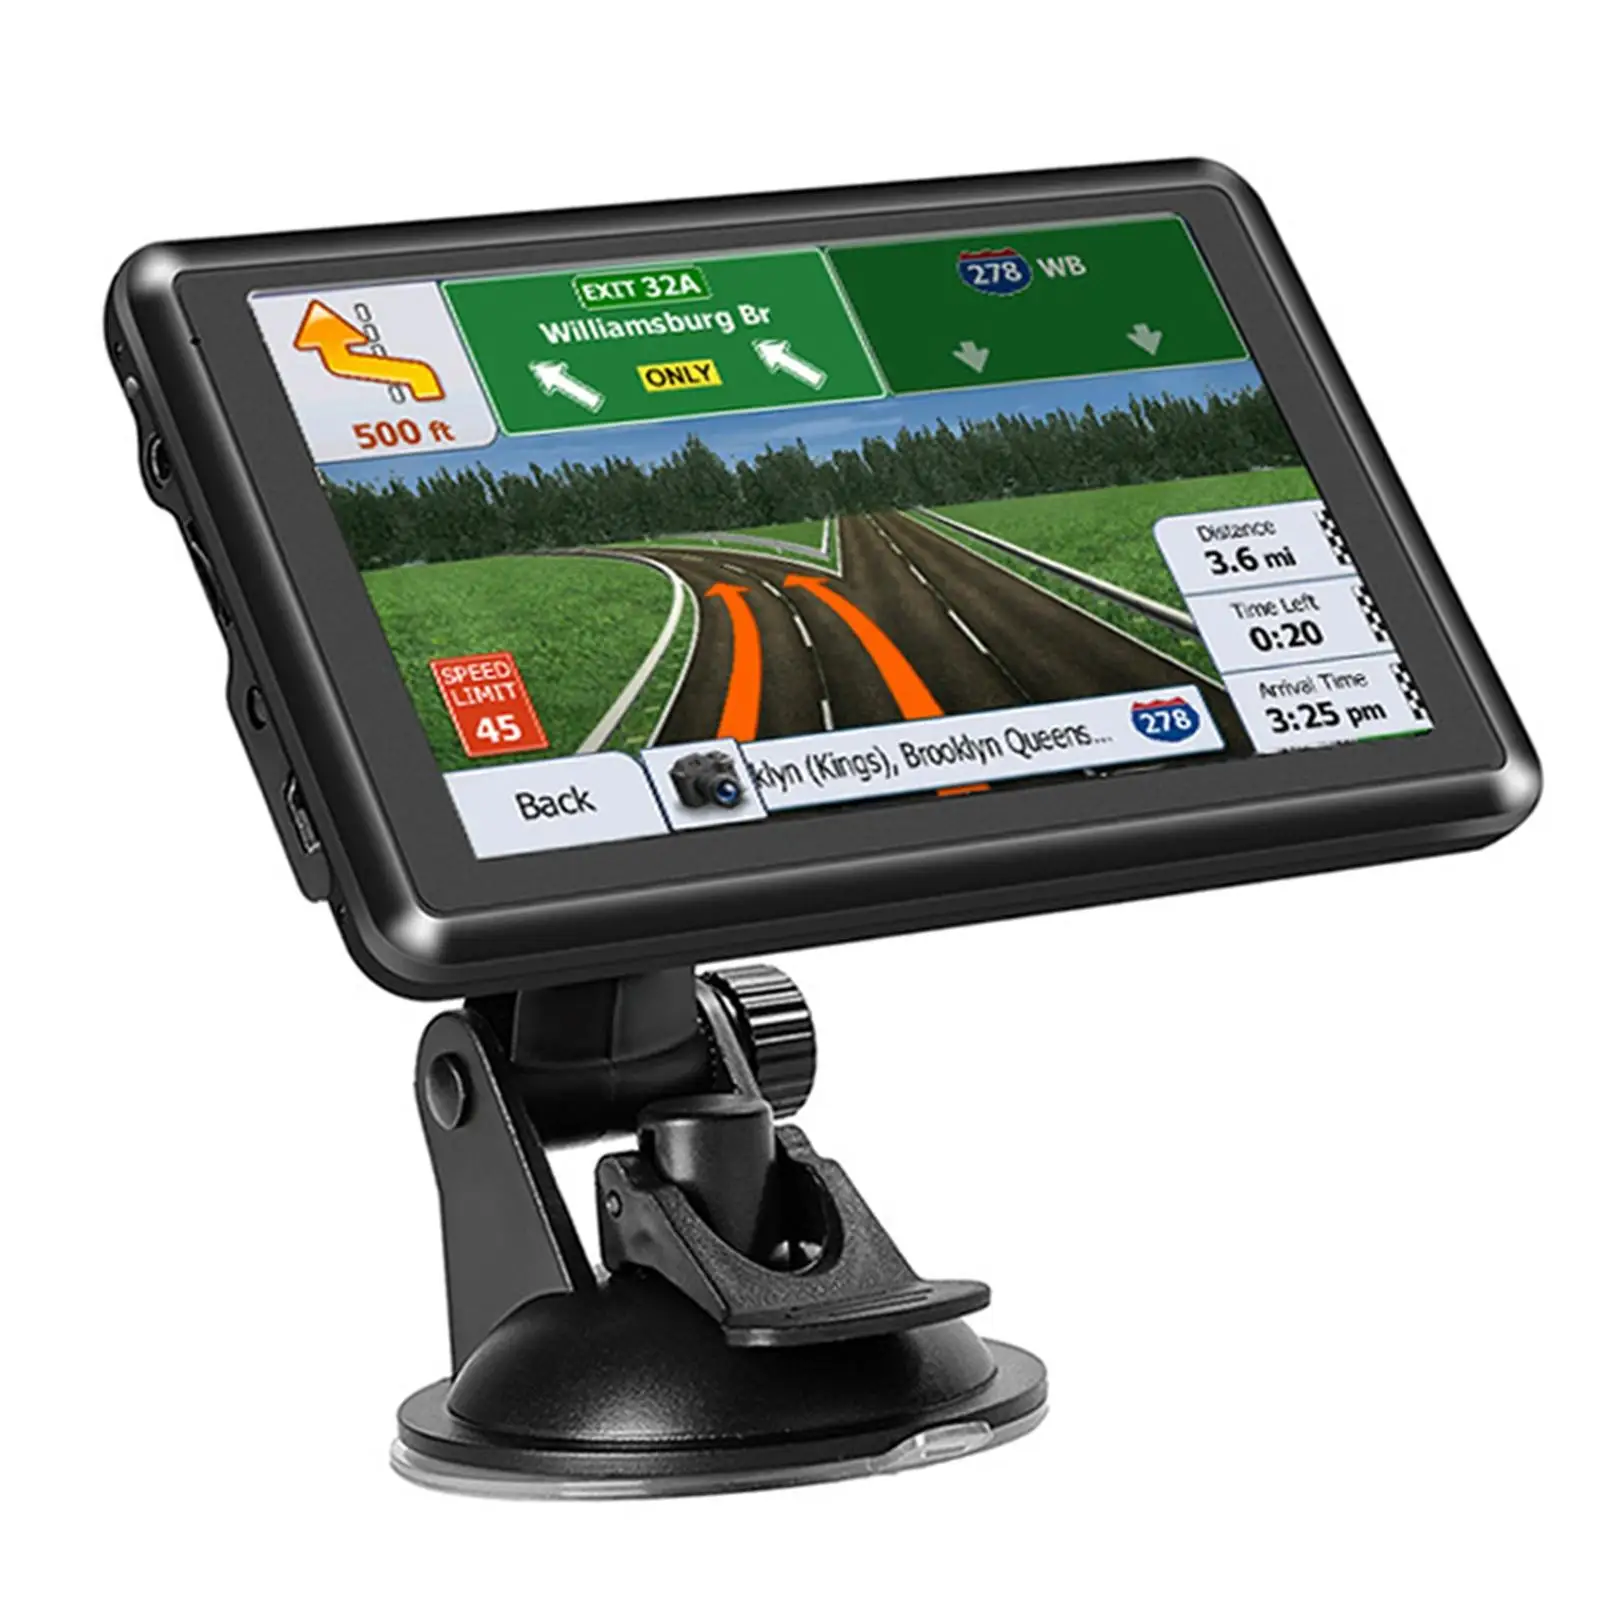 5 inch Touch Screen Car Truck GPS Navigation System GPS Satellite Navigator, Vehicle 8G &128 MB High Resolution Maps